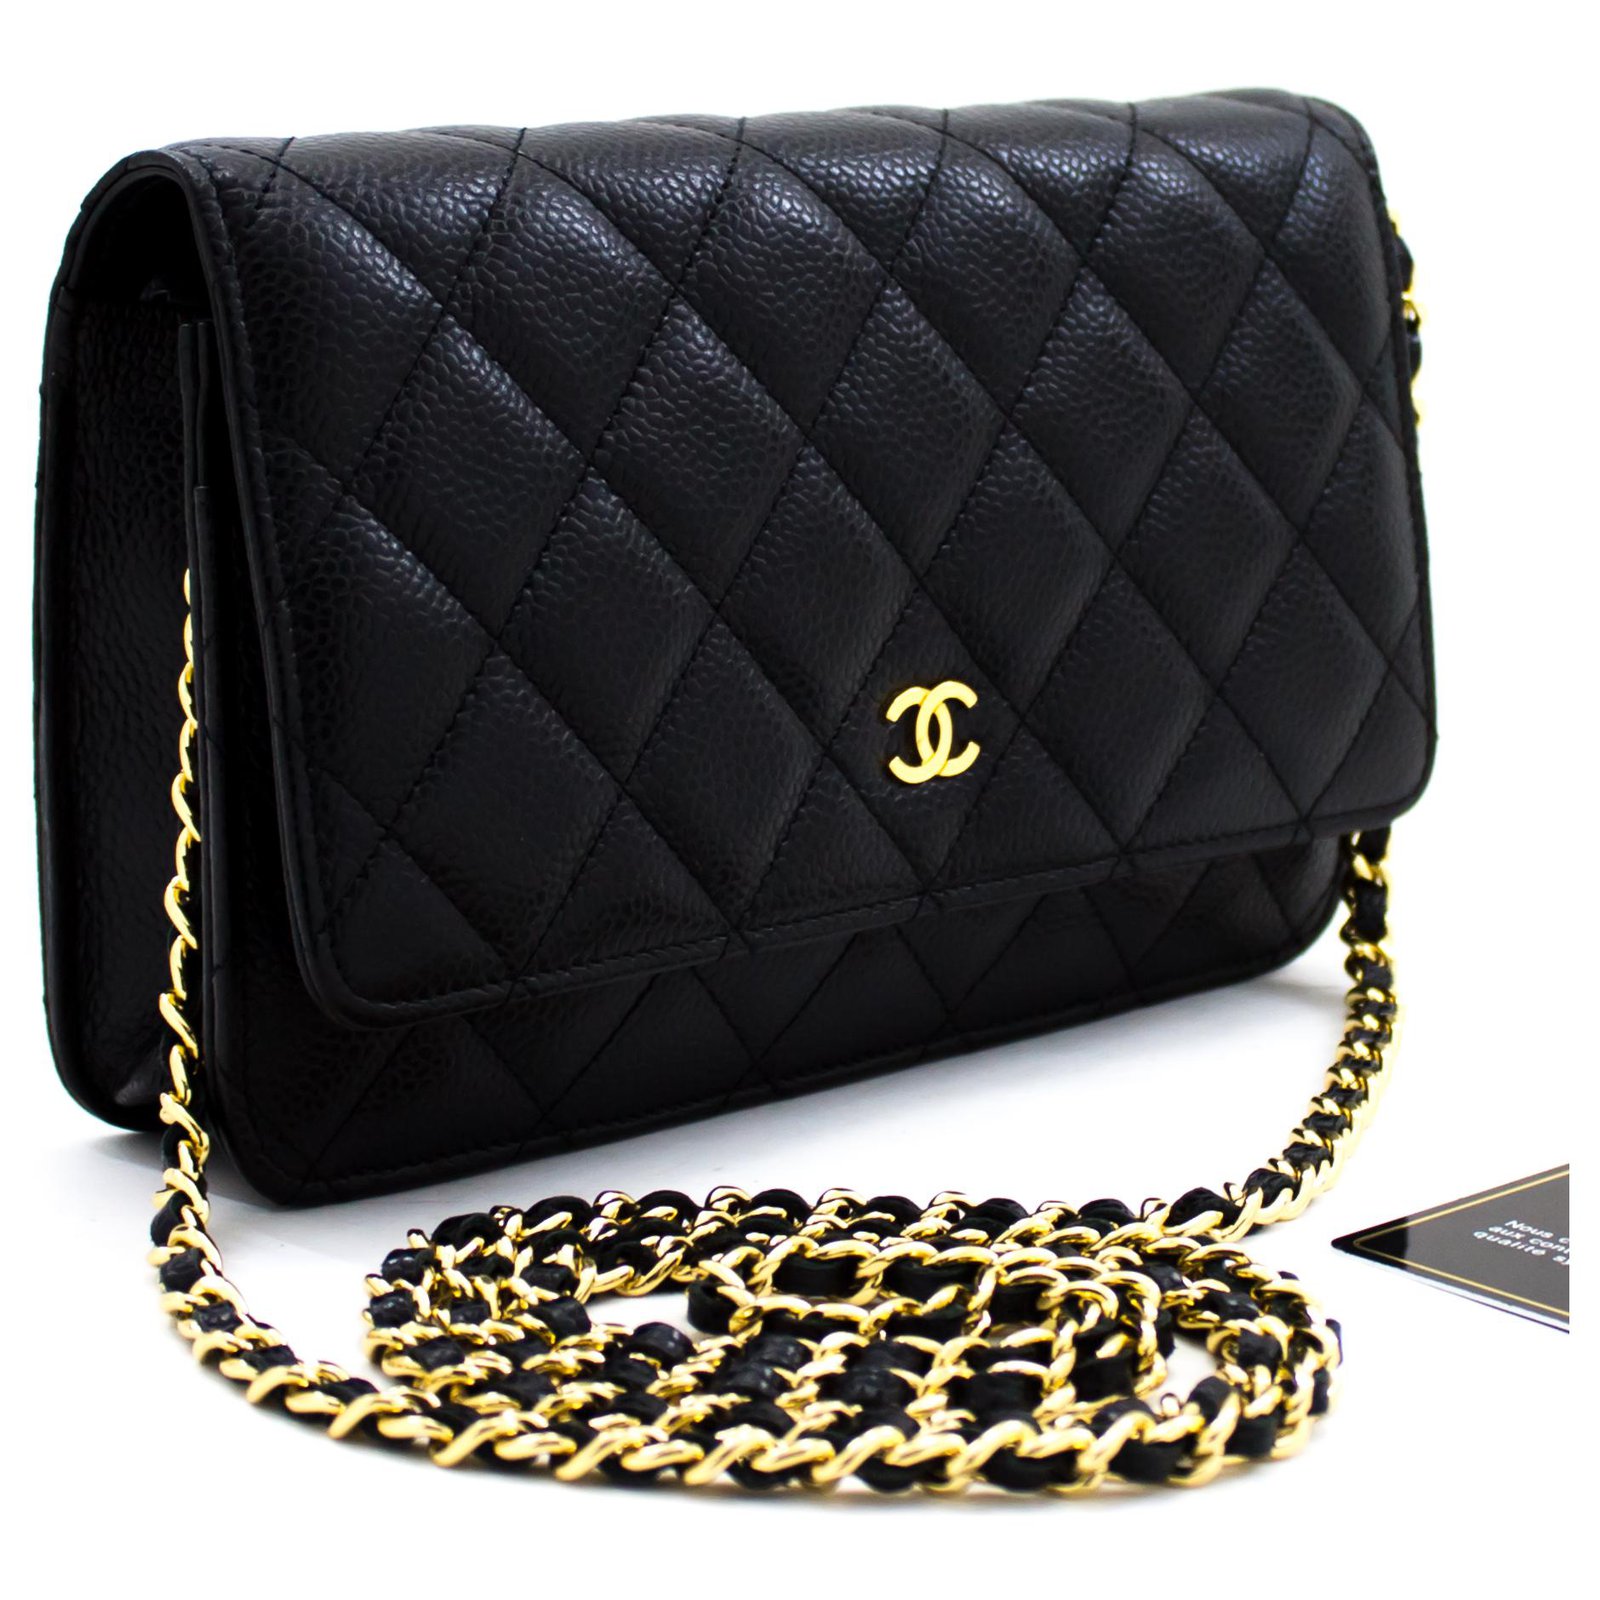 Chanel CHANEL Caviar Wallet On Chain WOC Schwarze Umh ngetasche  